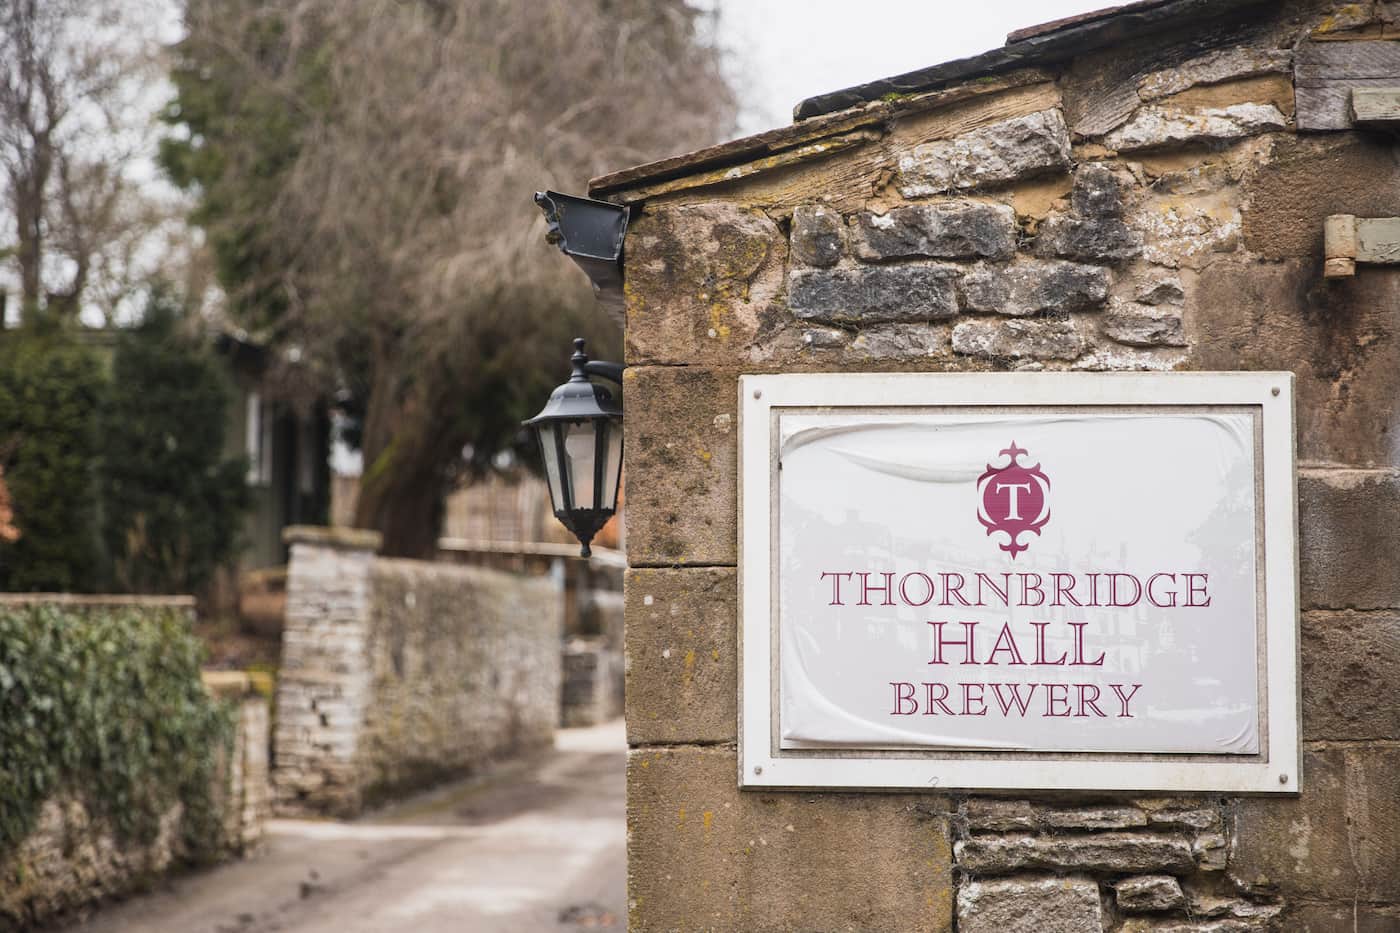 The sign to the original brewery at Thornbridge Hall